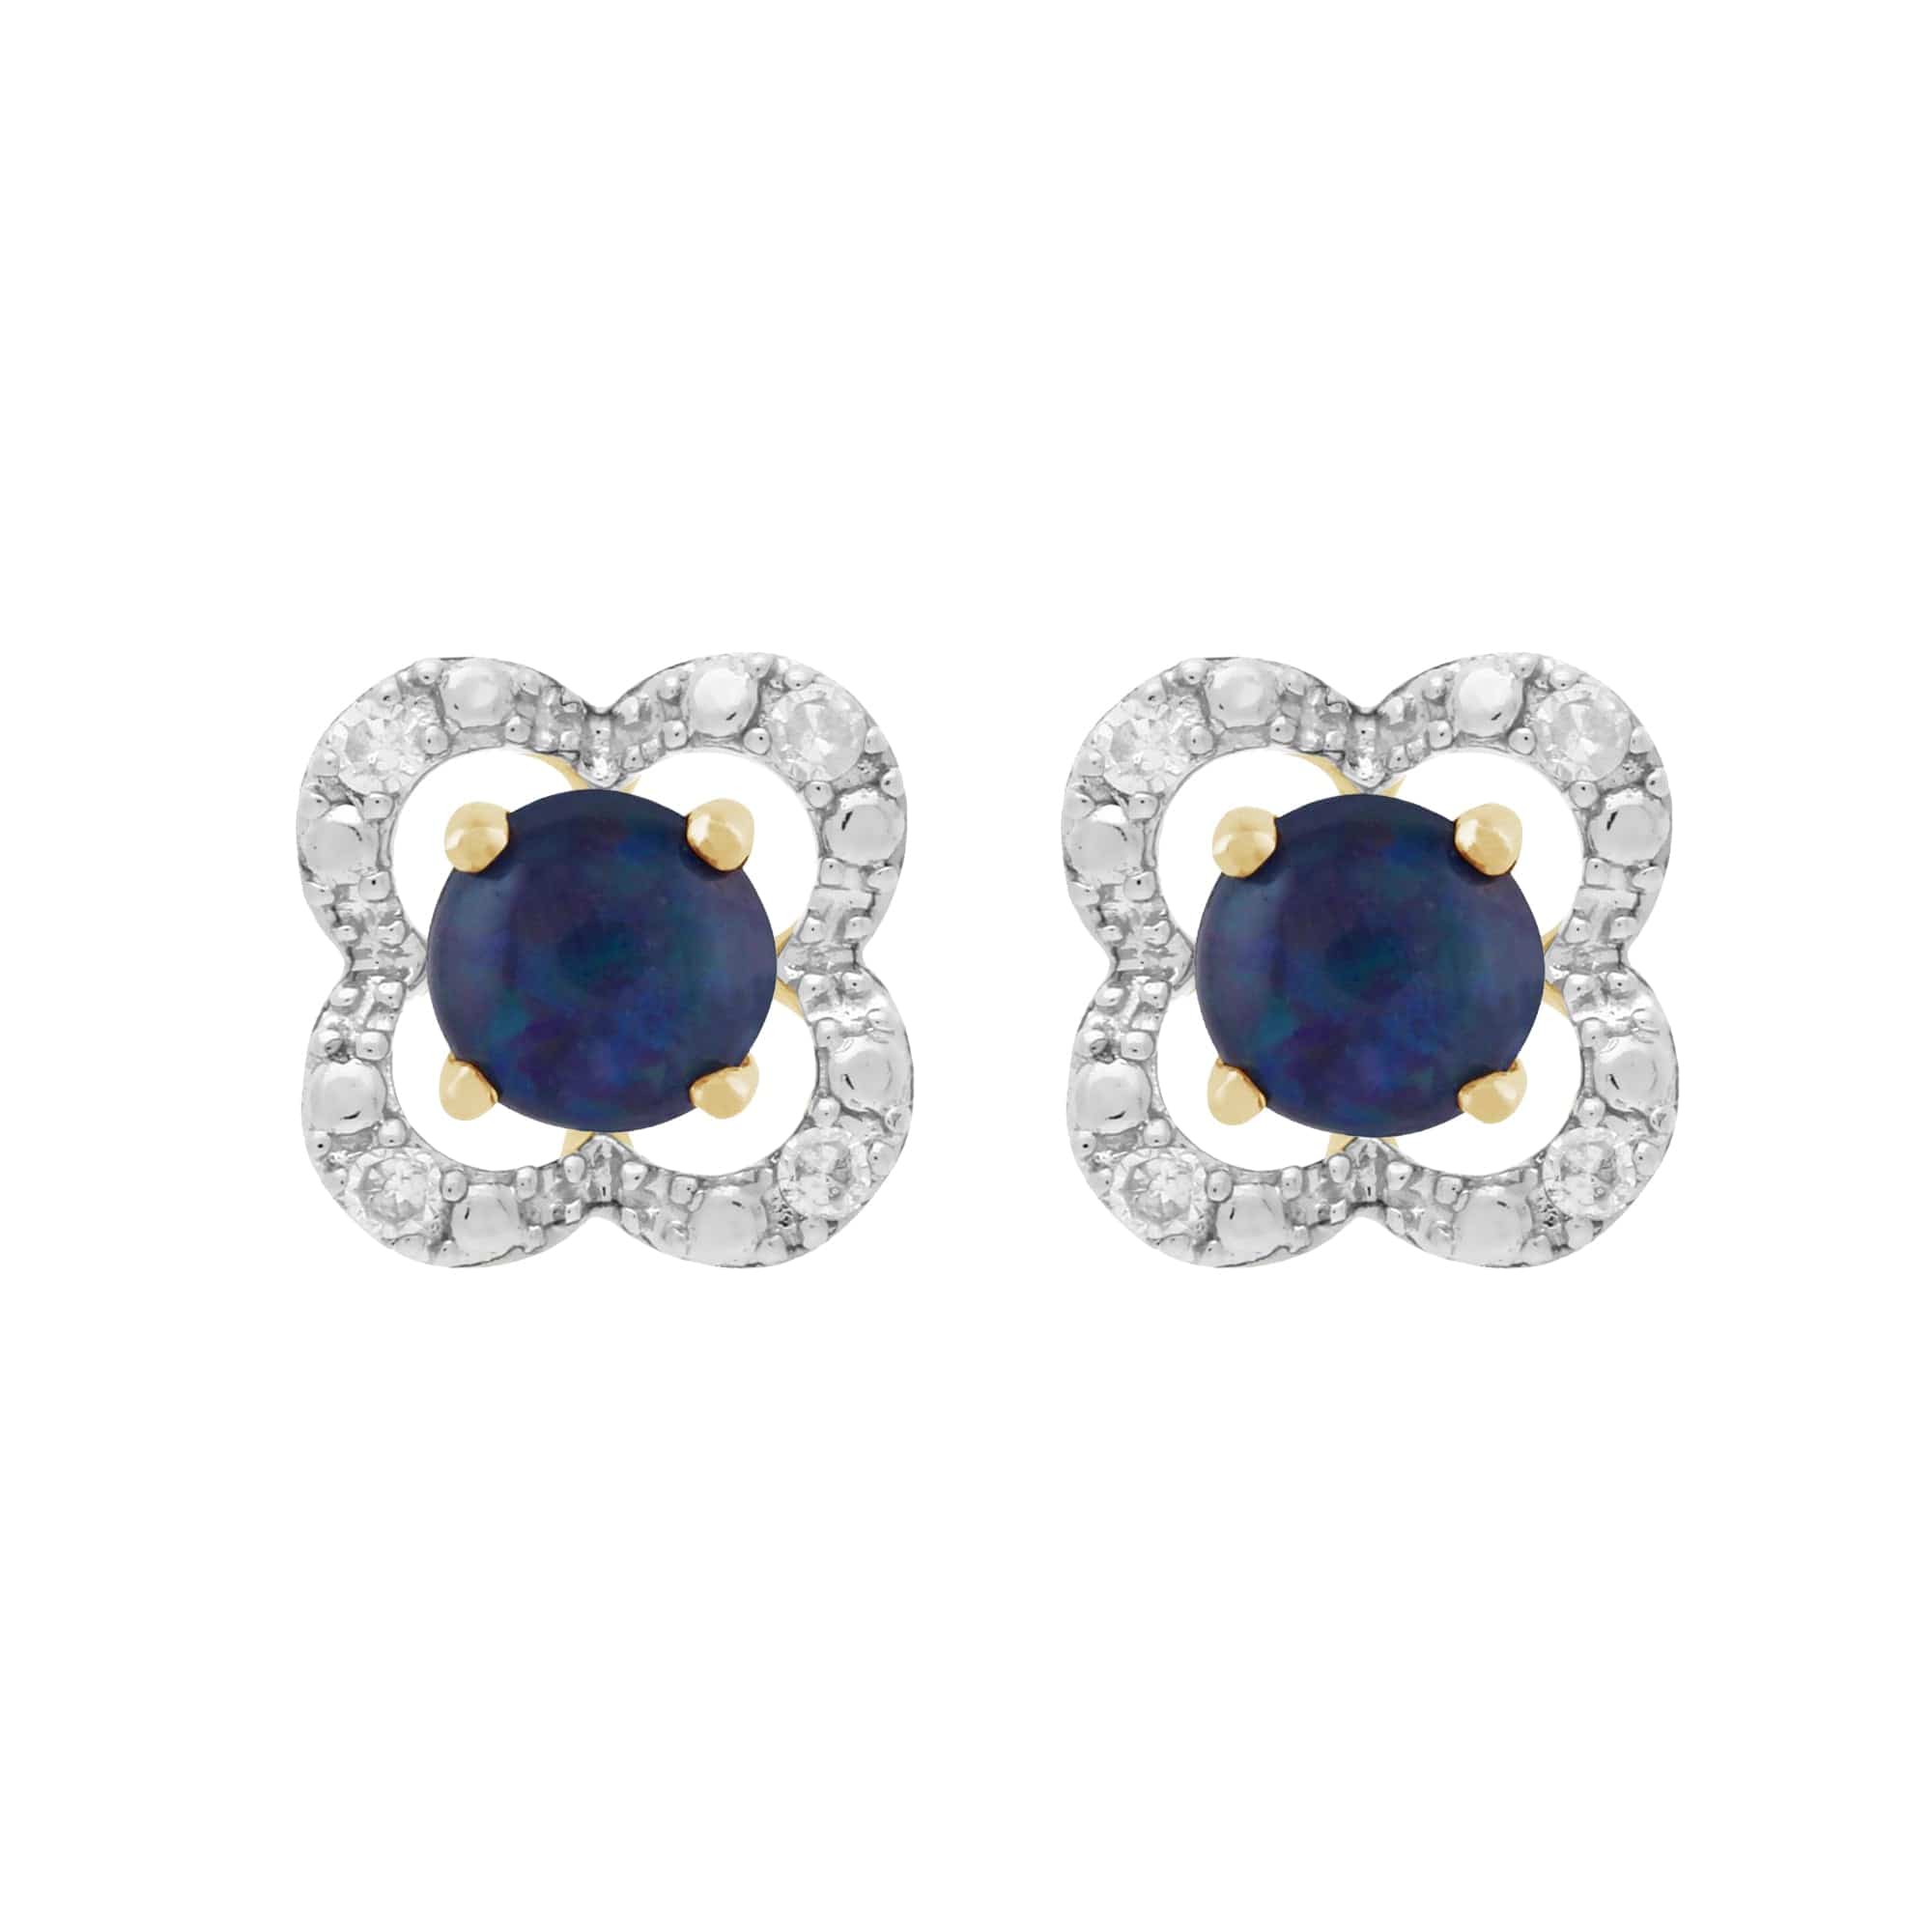 183E0083379-191E0375019 Classic Round Triplet Opal Studs with Detachable Diamond Floral Ear Jacket in 9ct Yellow Gold 1